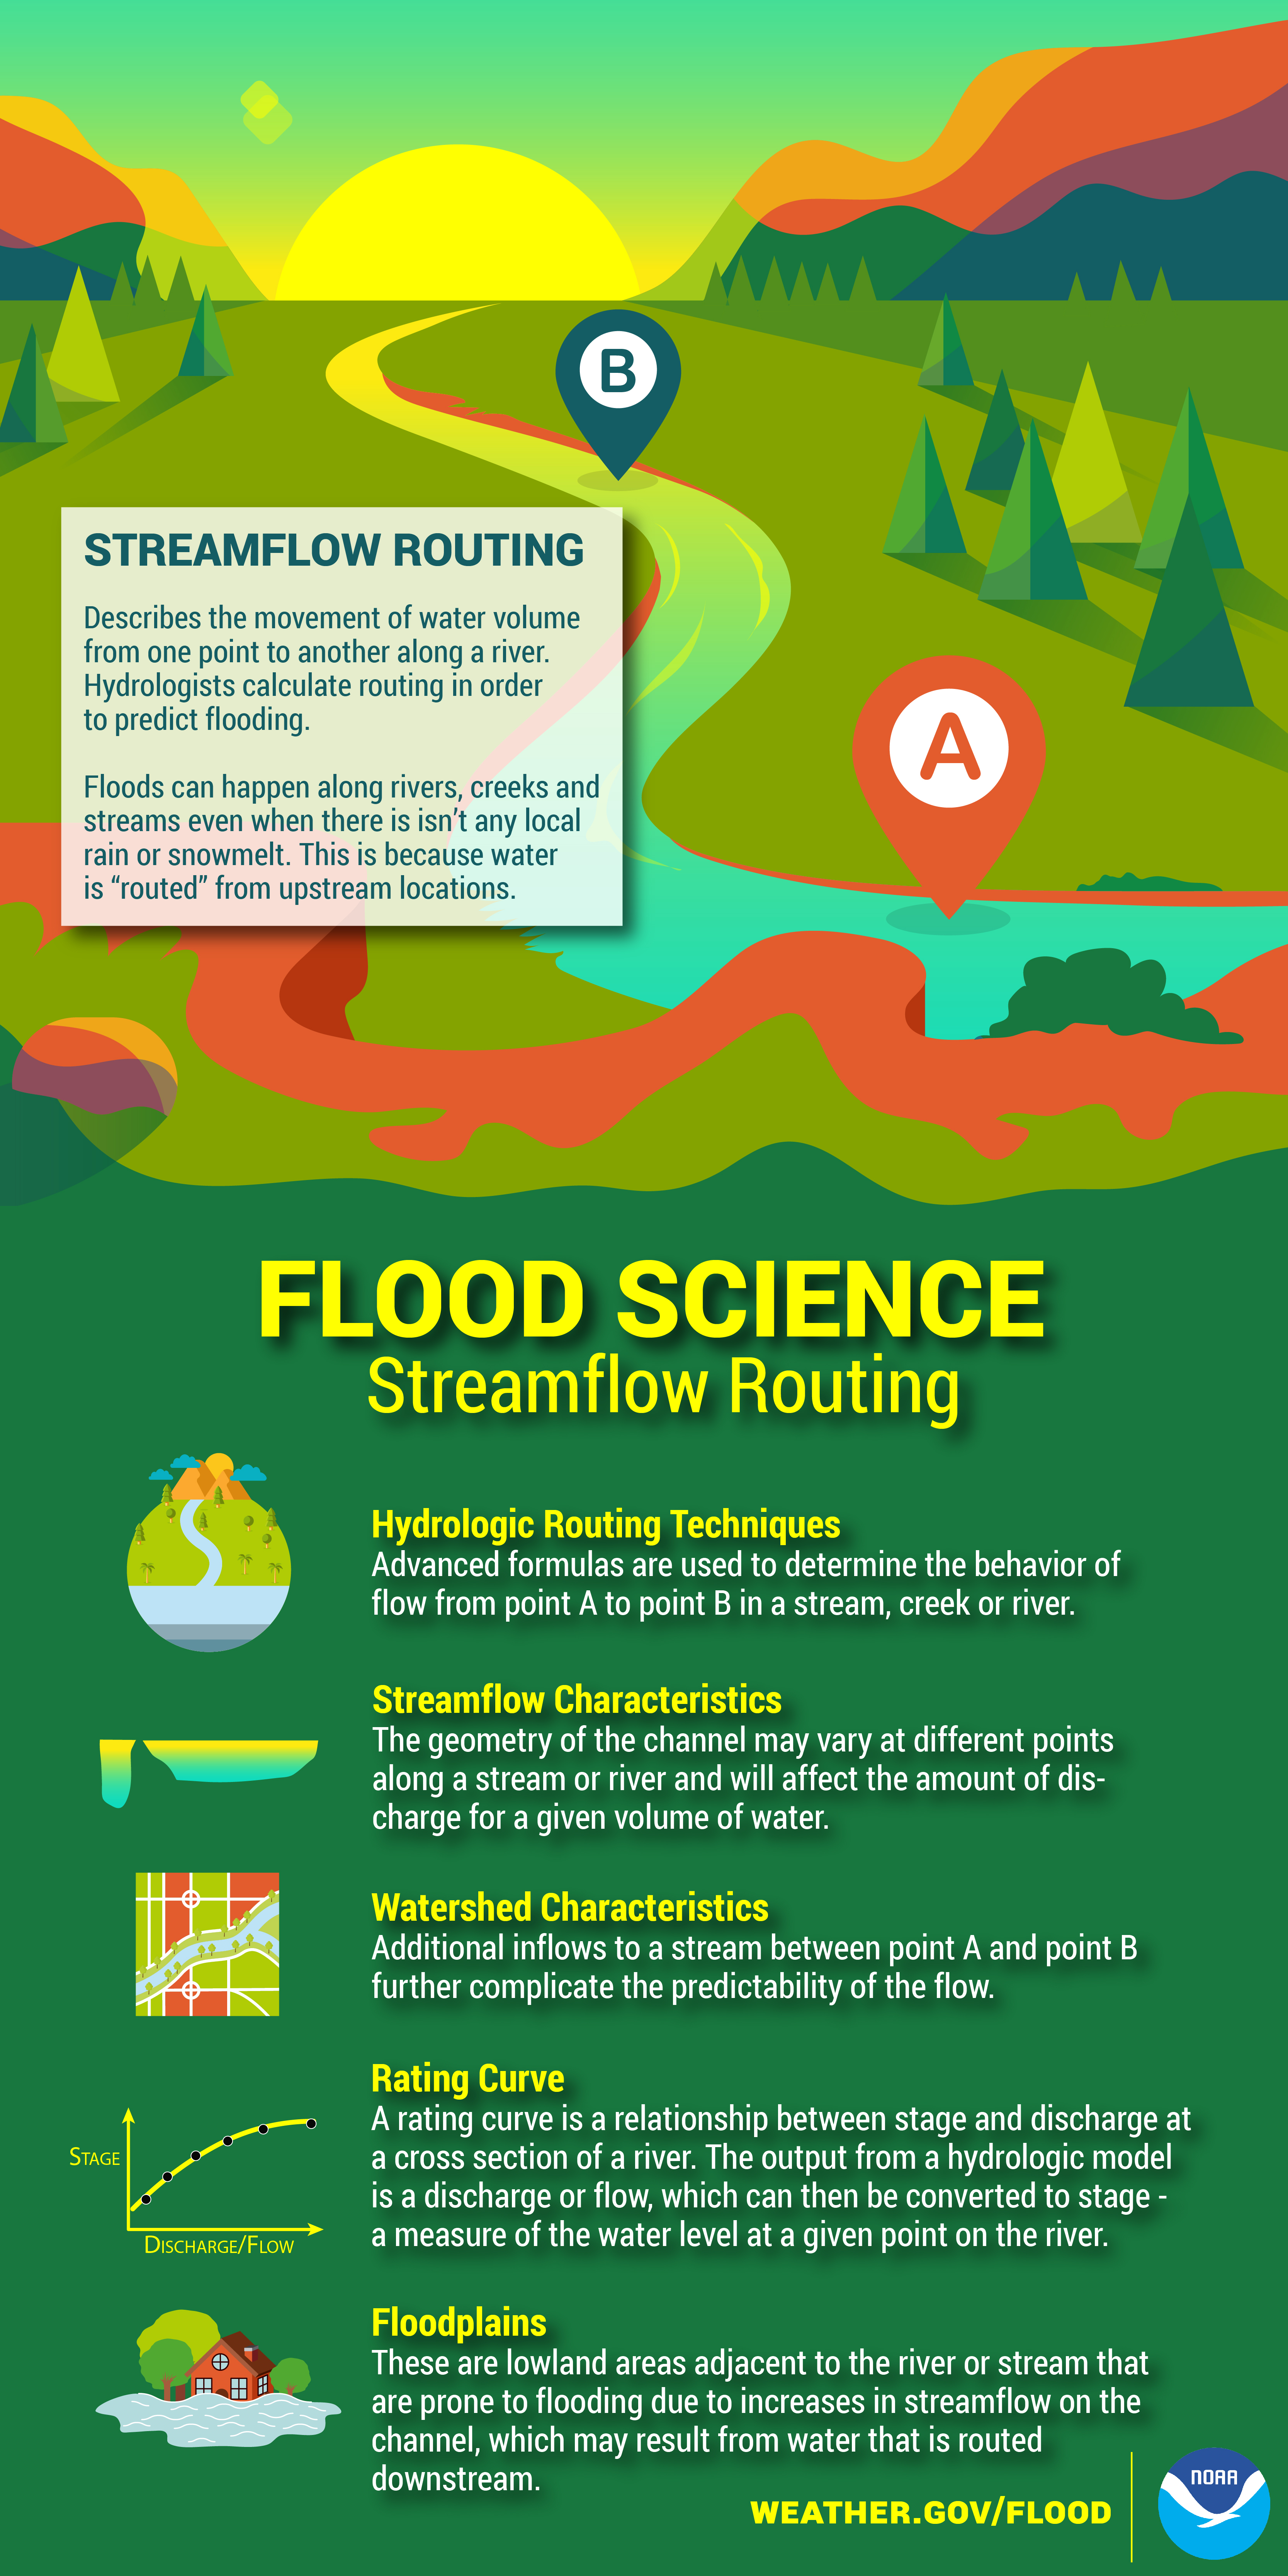 flooding-science-streamflow-routing.jpg